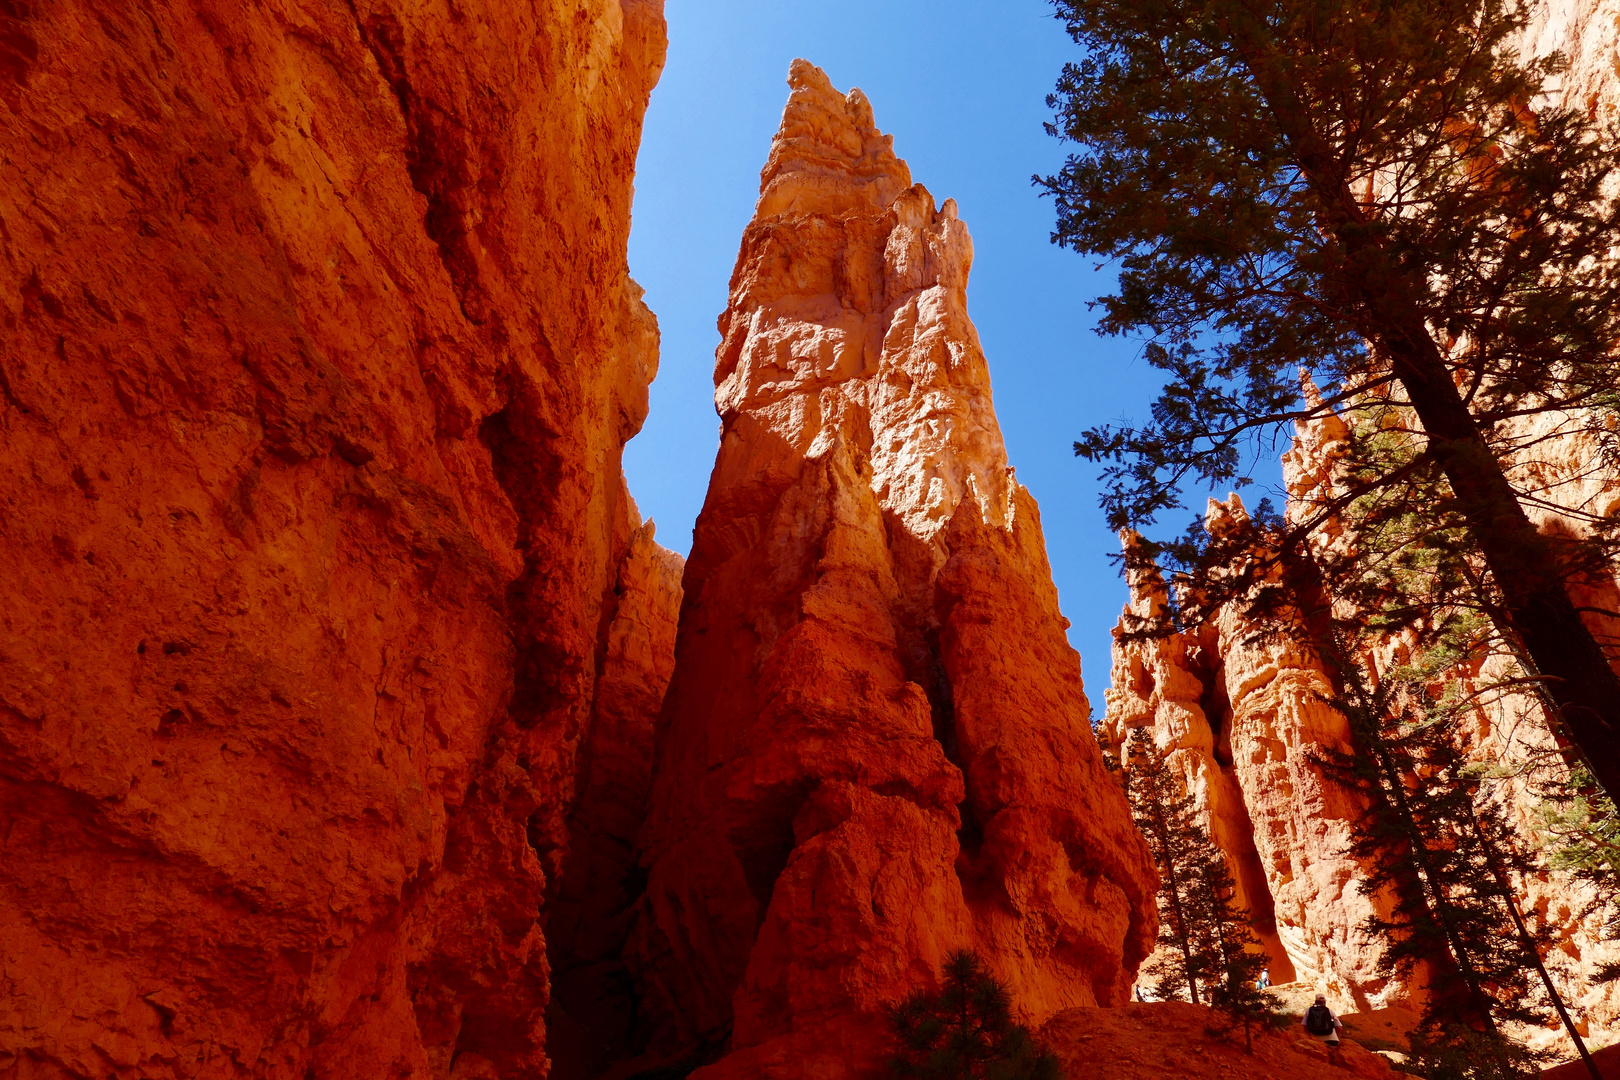 Looking up Bryce Canyon